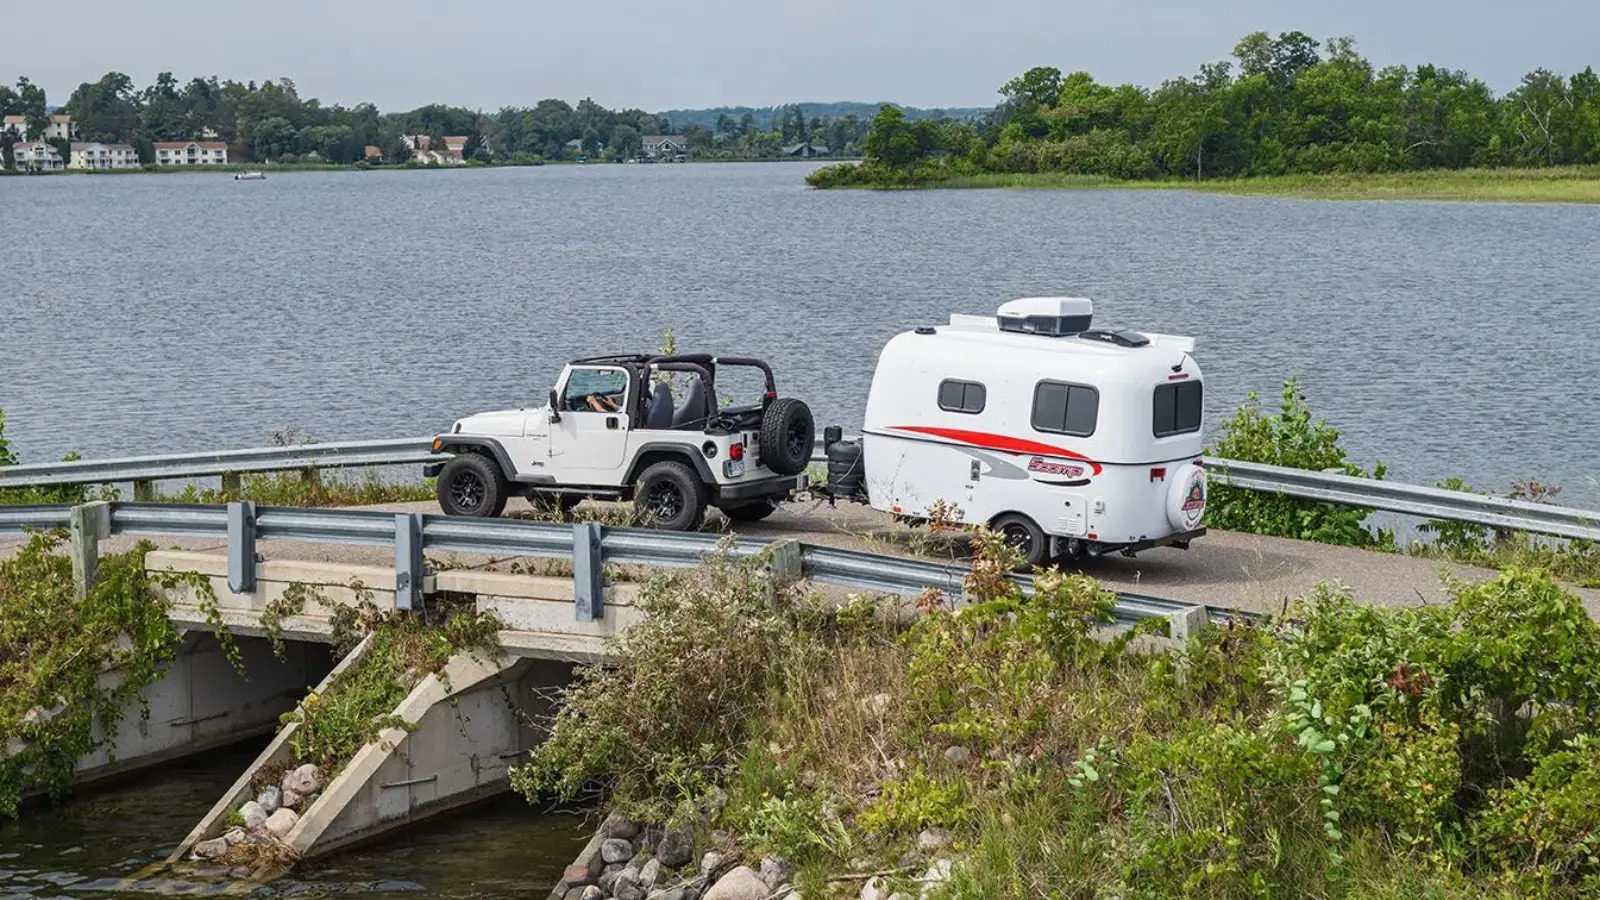 4 Simple Yet Essential Items You Should Have When Towing A Trailer Or Camper – SlashGear